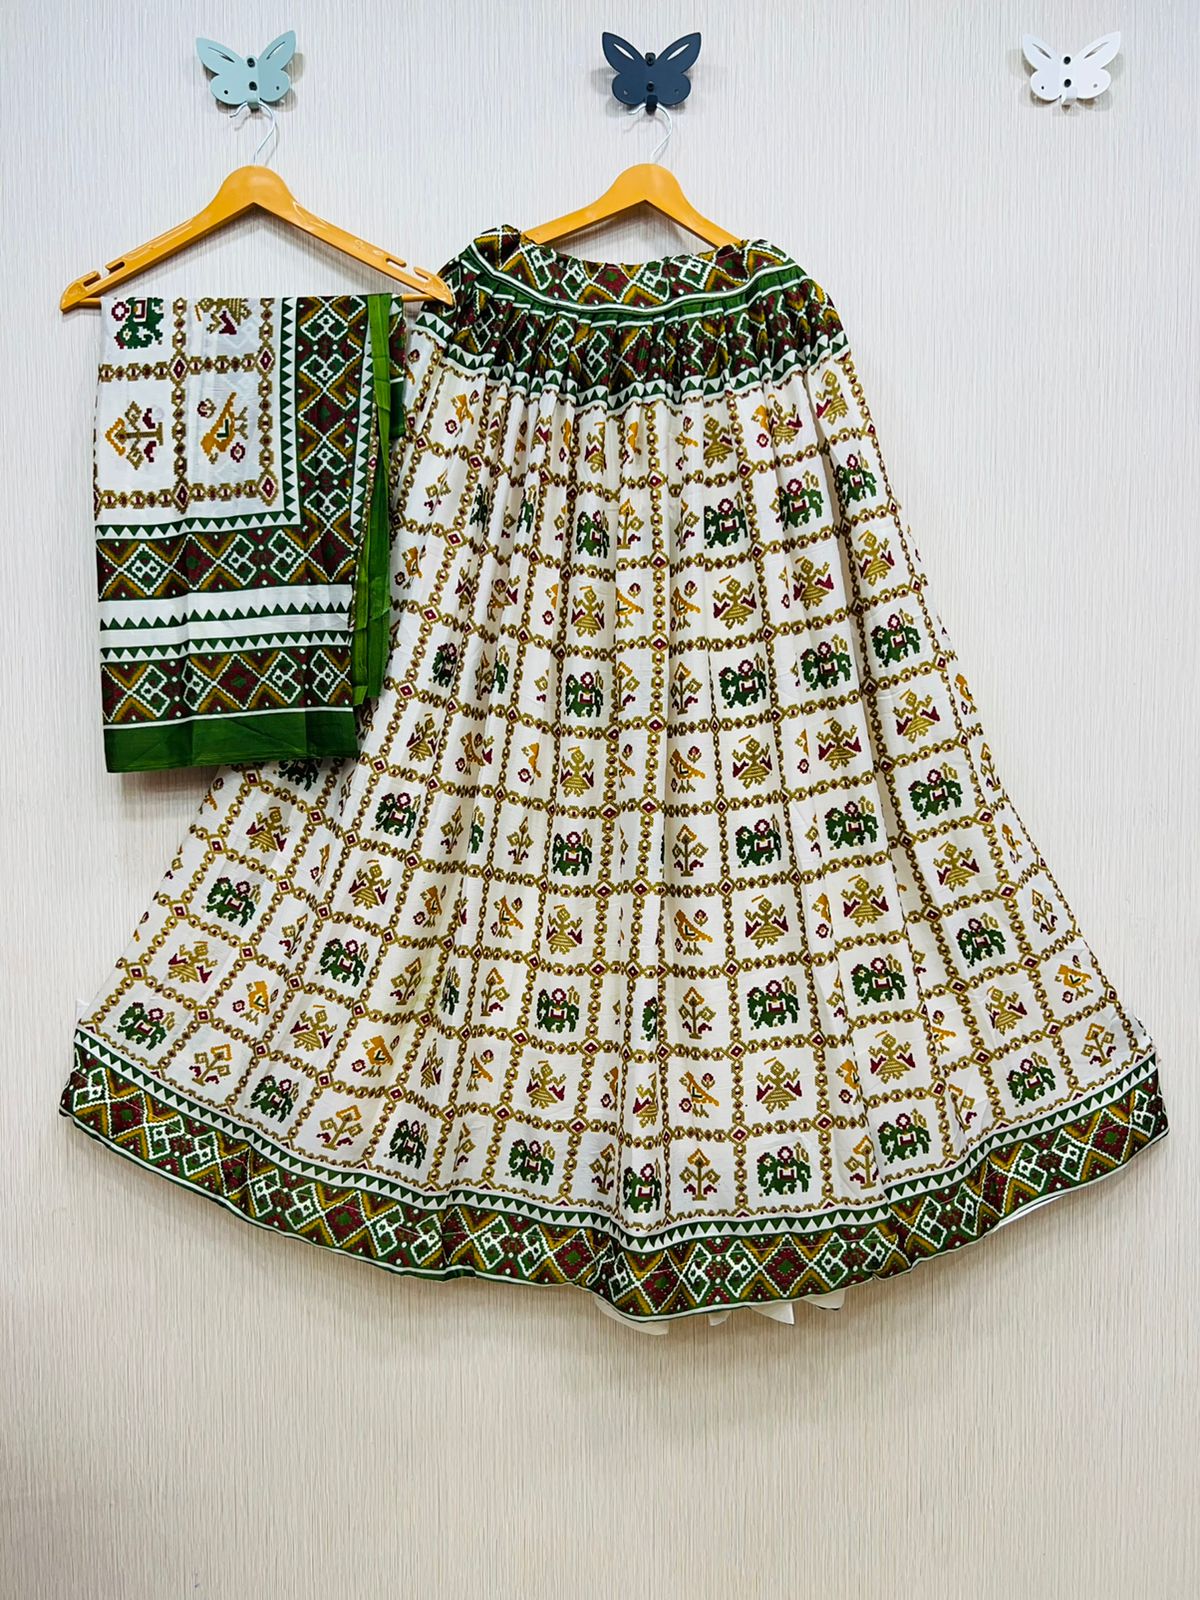 Patola Skirt and Blouse Material